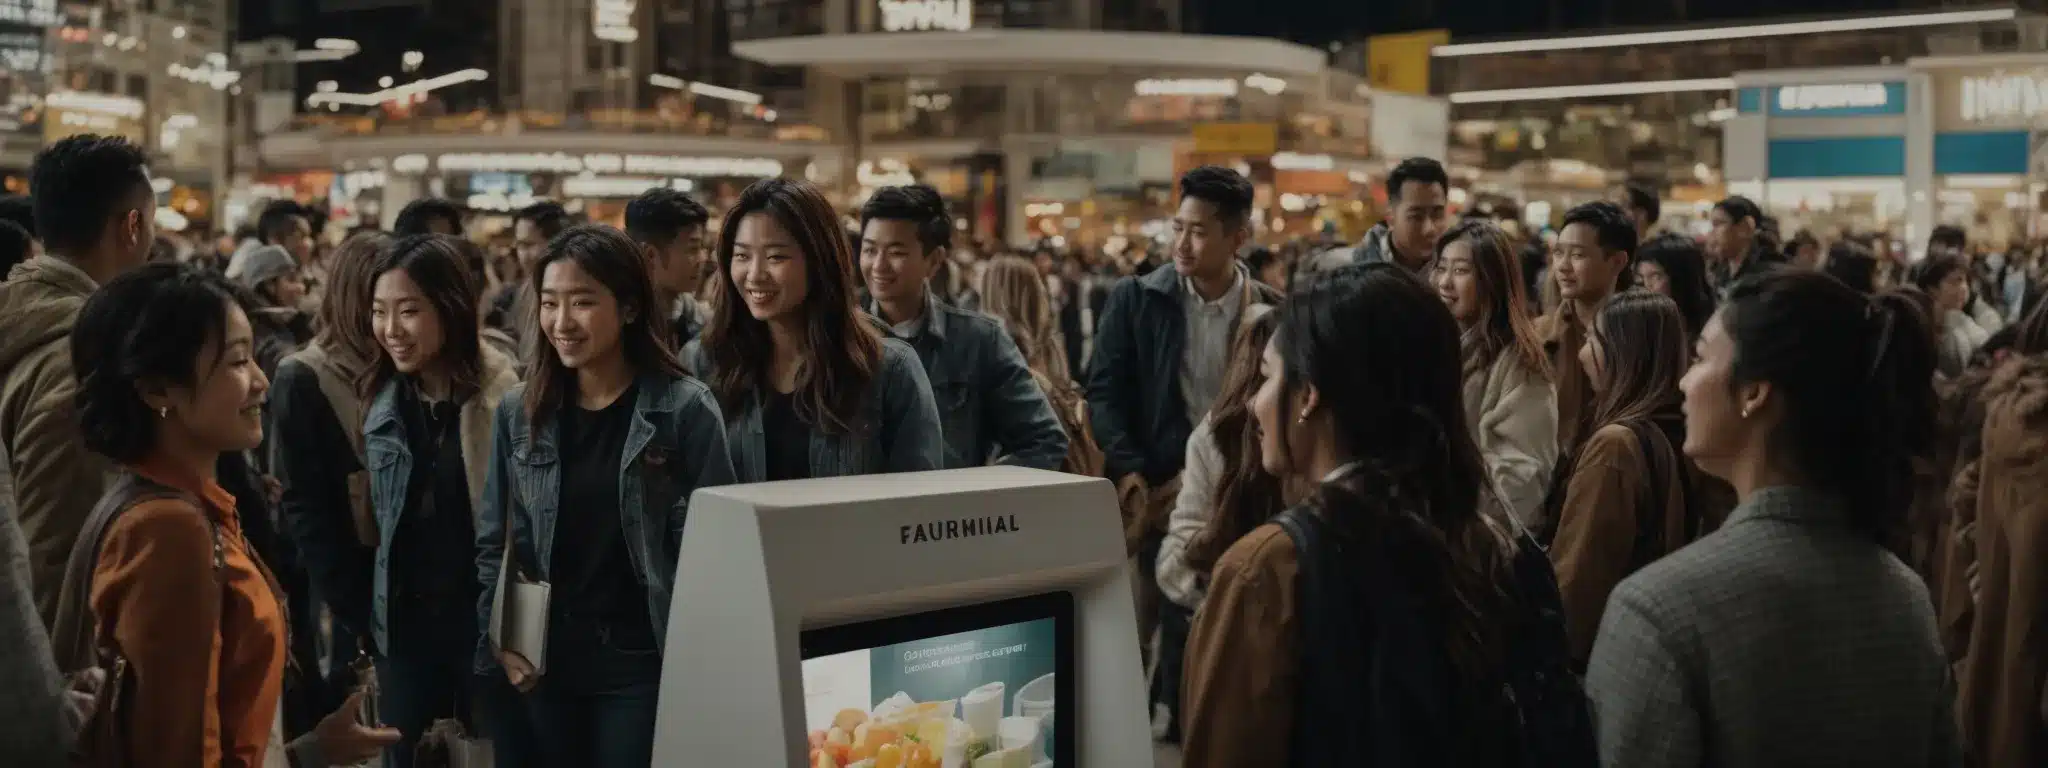 A Crowd Of Shoppers Excitedly Interacts With A Dynamic Digital Kiosk Offering Fun Challenges And Rewards.